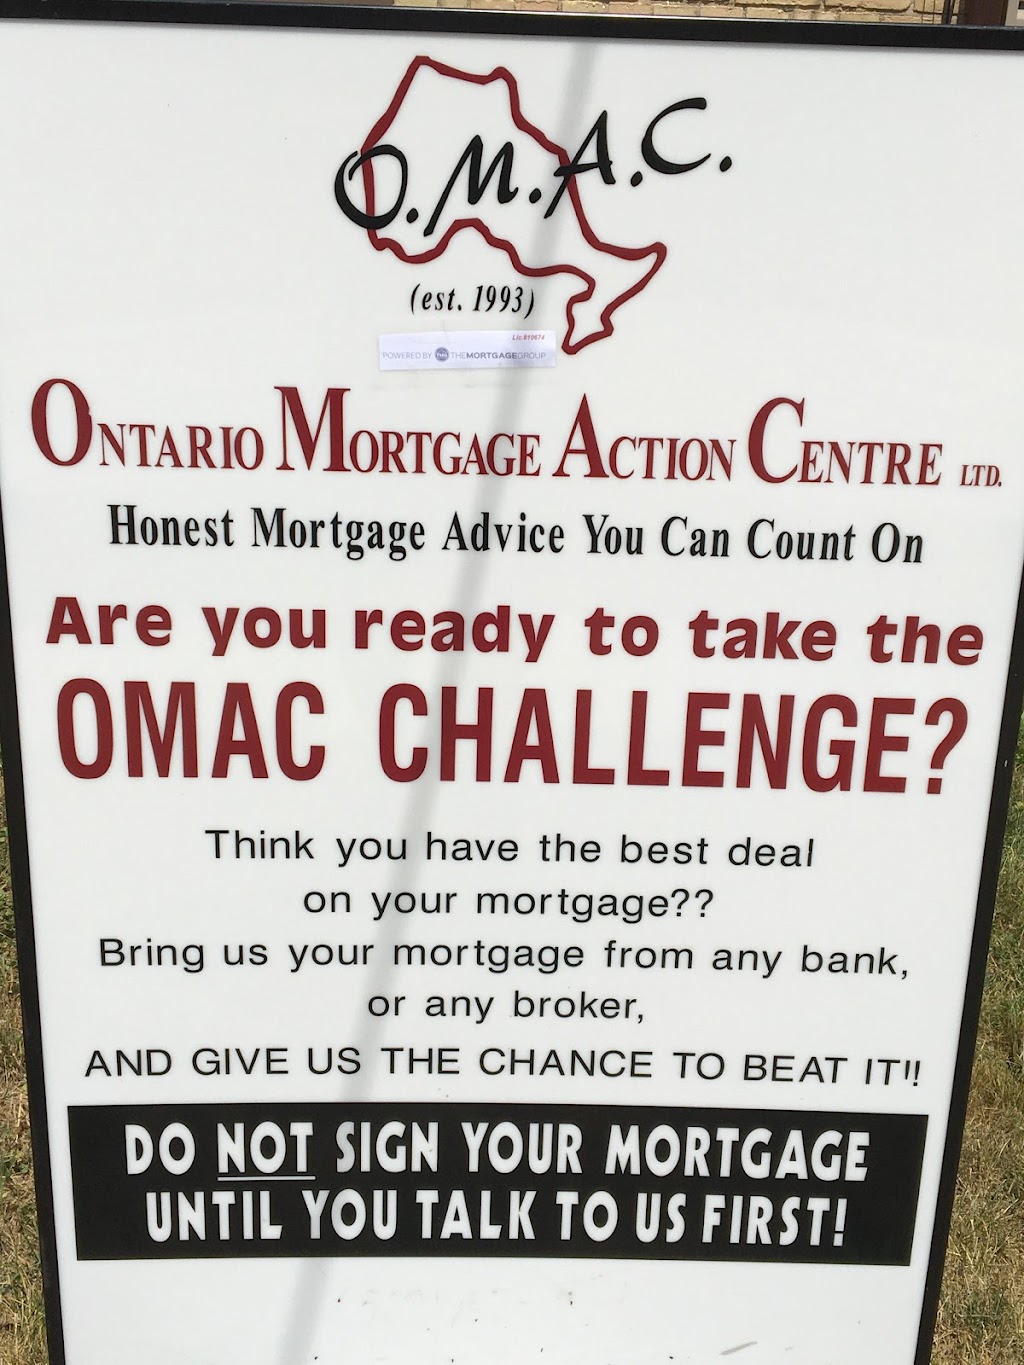 OMAC Mortgages St. Thomas Hassan Hamze | 231 Forest Ave, St Thomas, ON N5R 2K5, Canada | Phone: (519) 777-6326